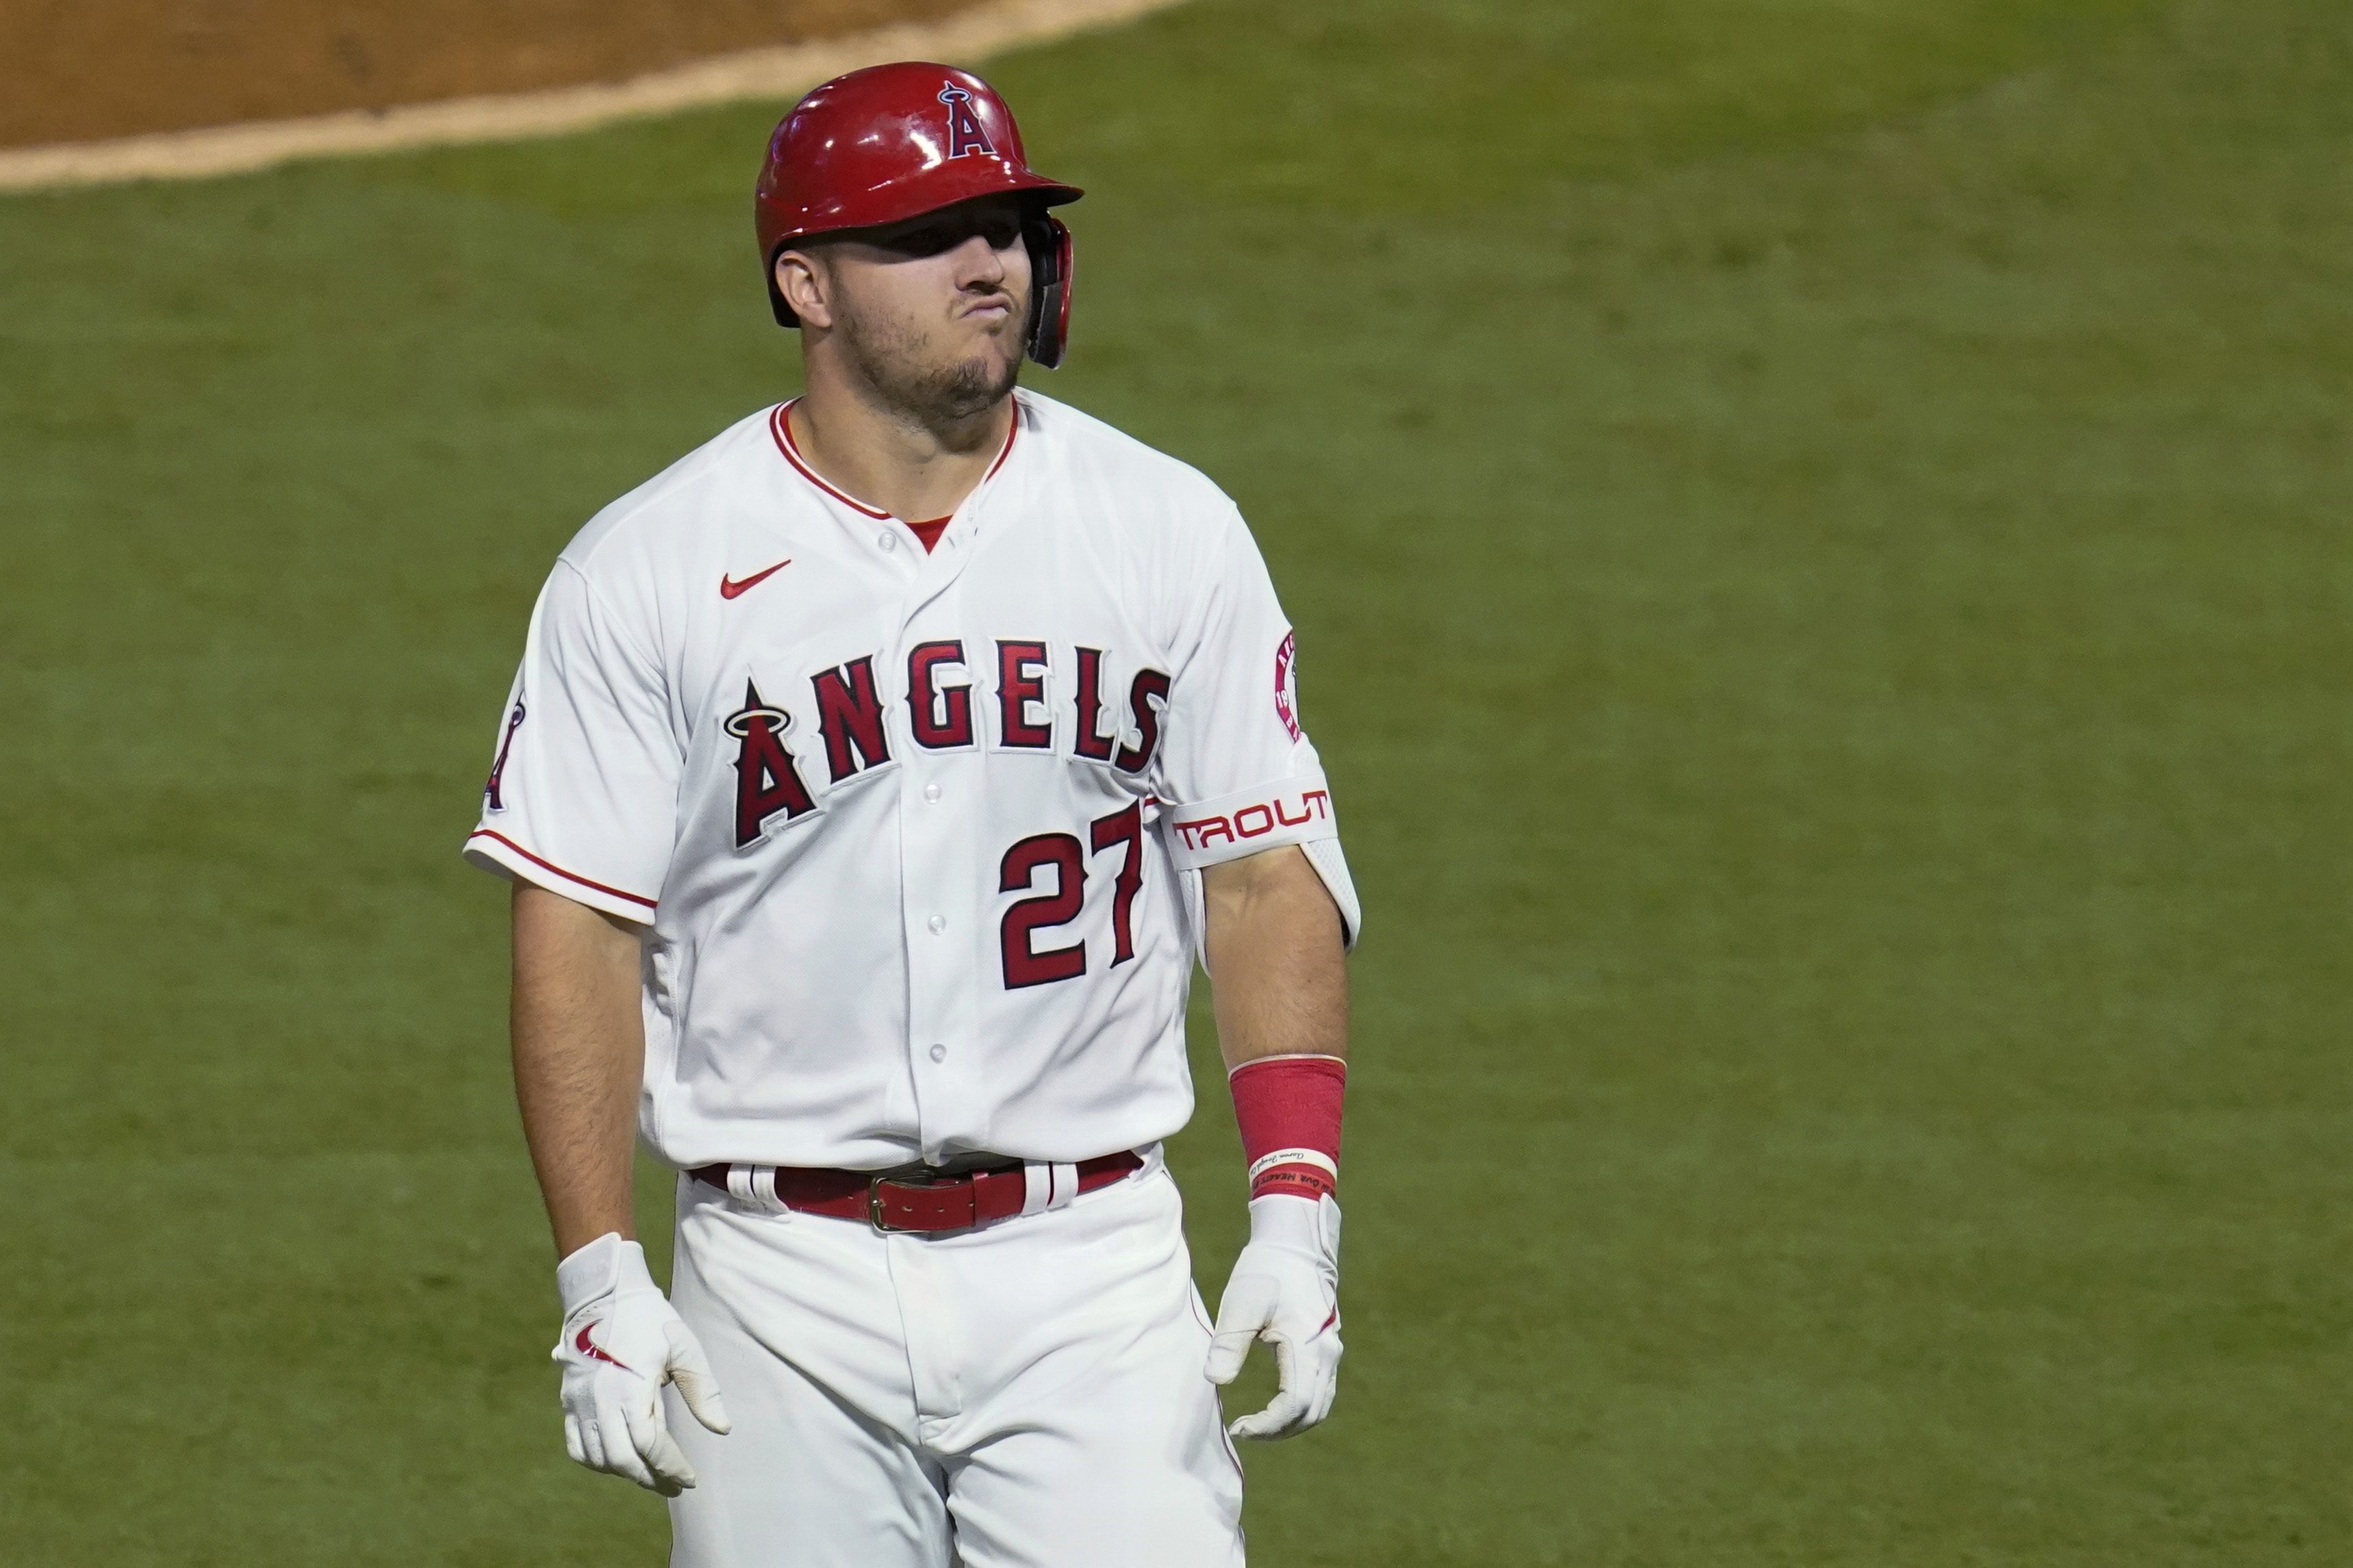 Mike Trout, one of the best players in baseball, is finally moving